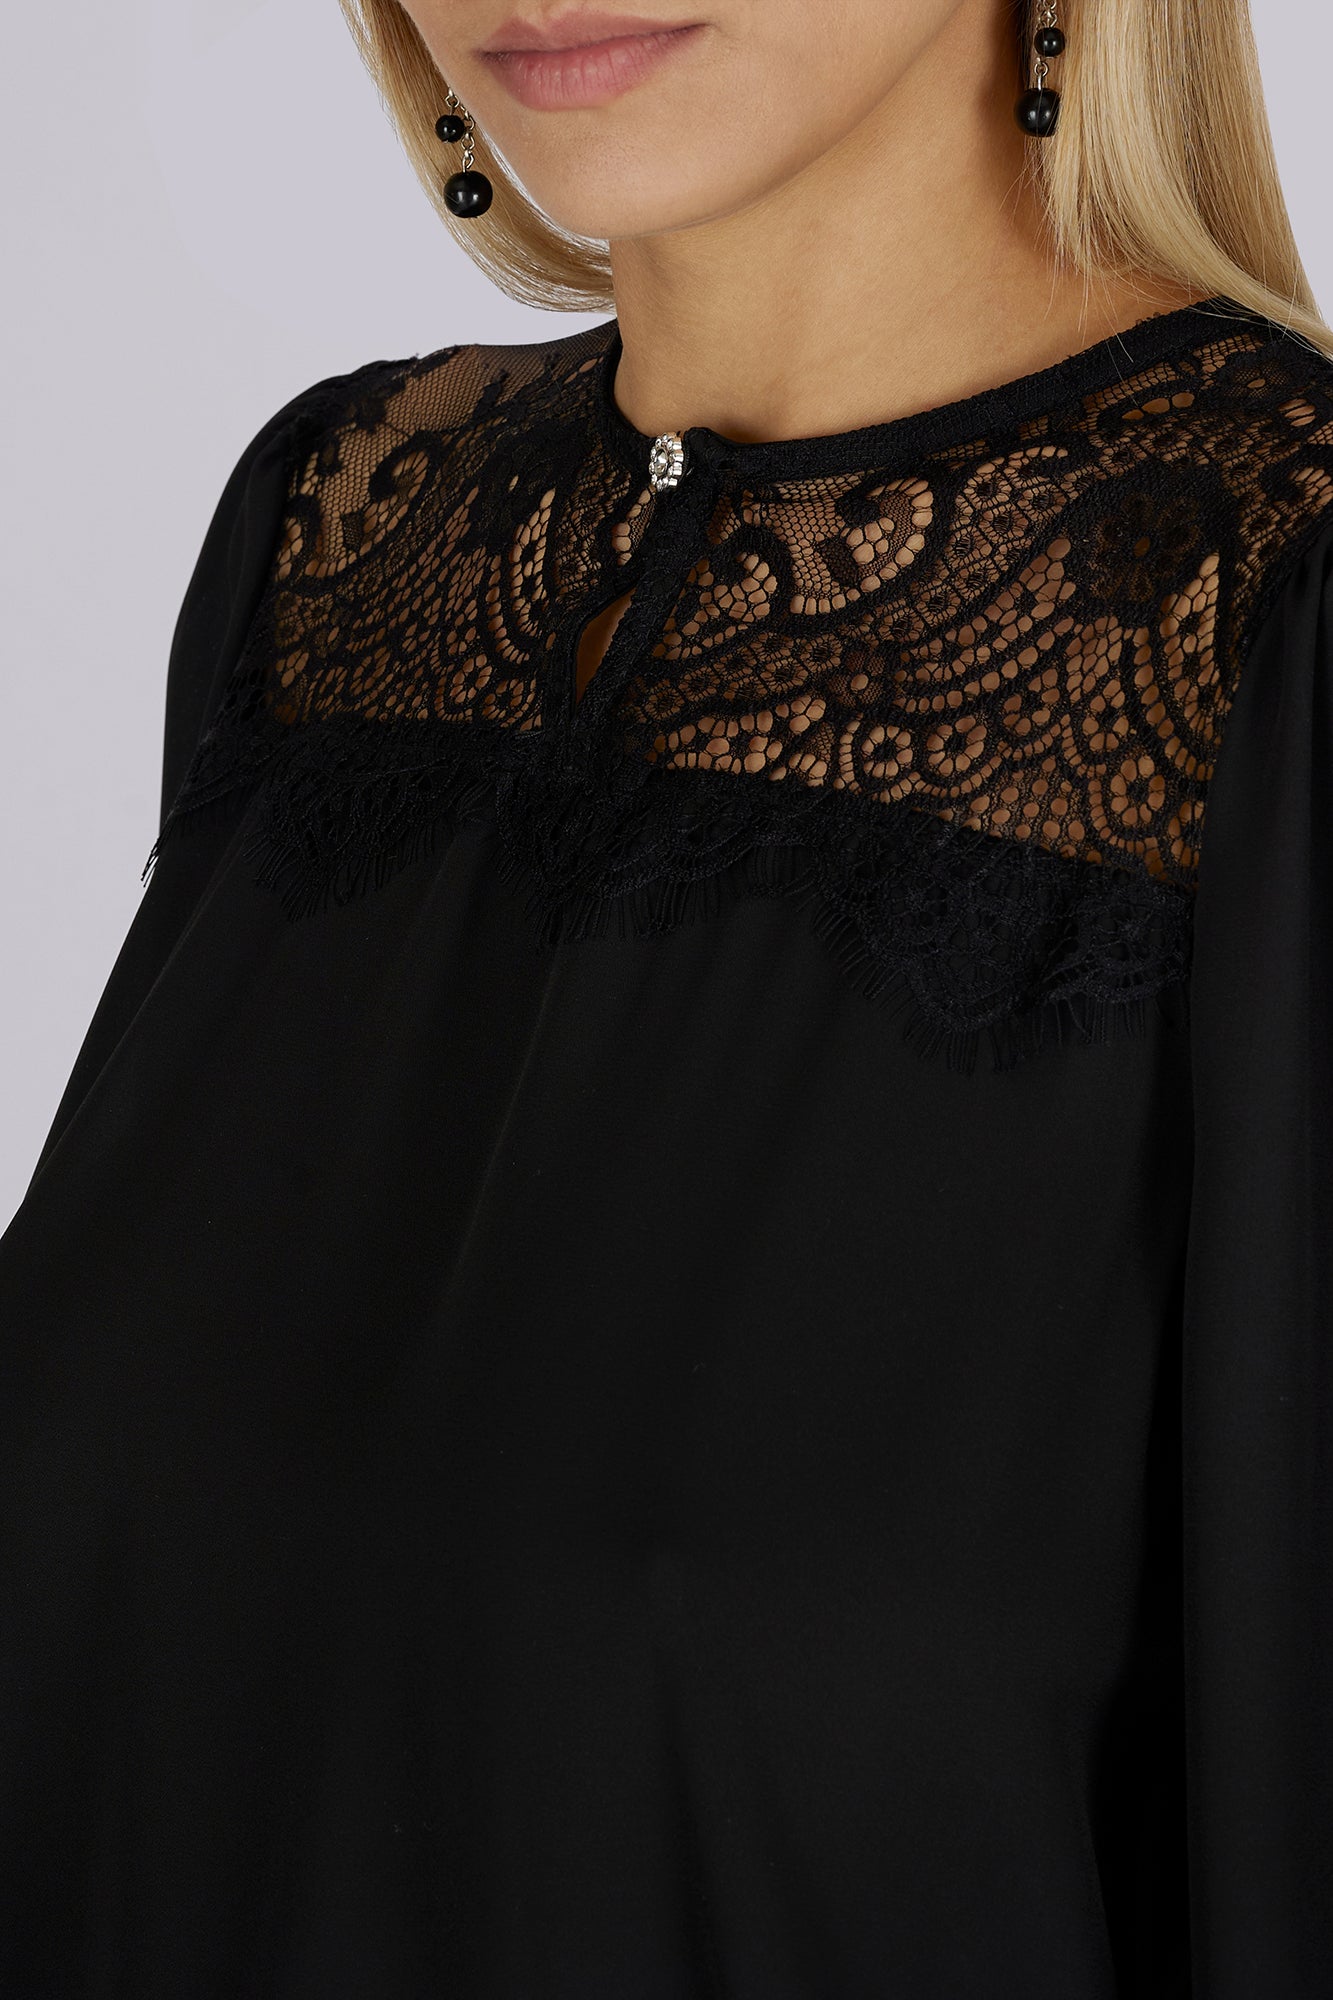 Blusa carré in pizzo